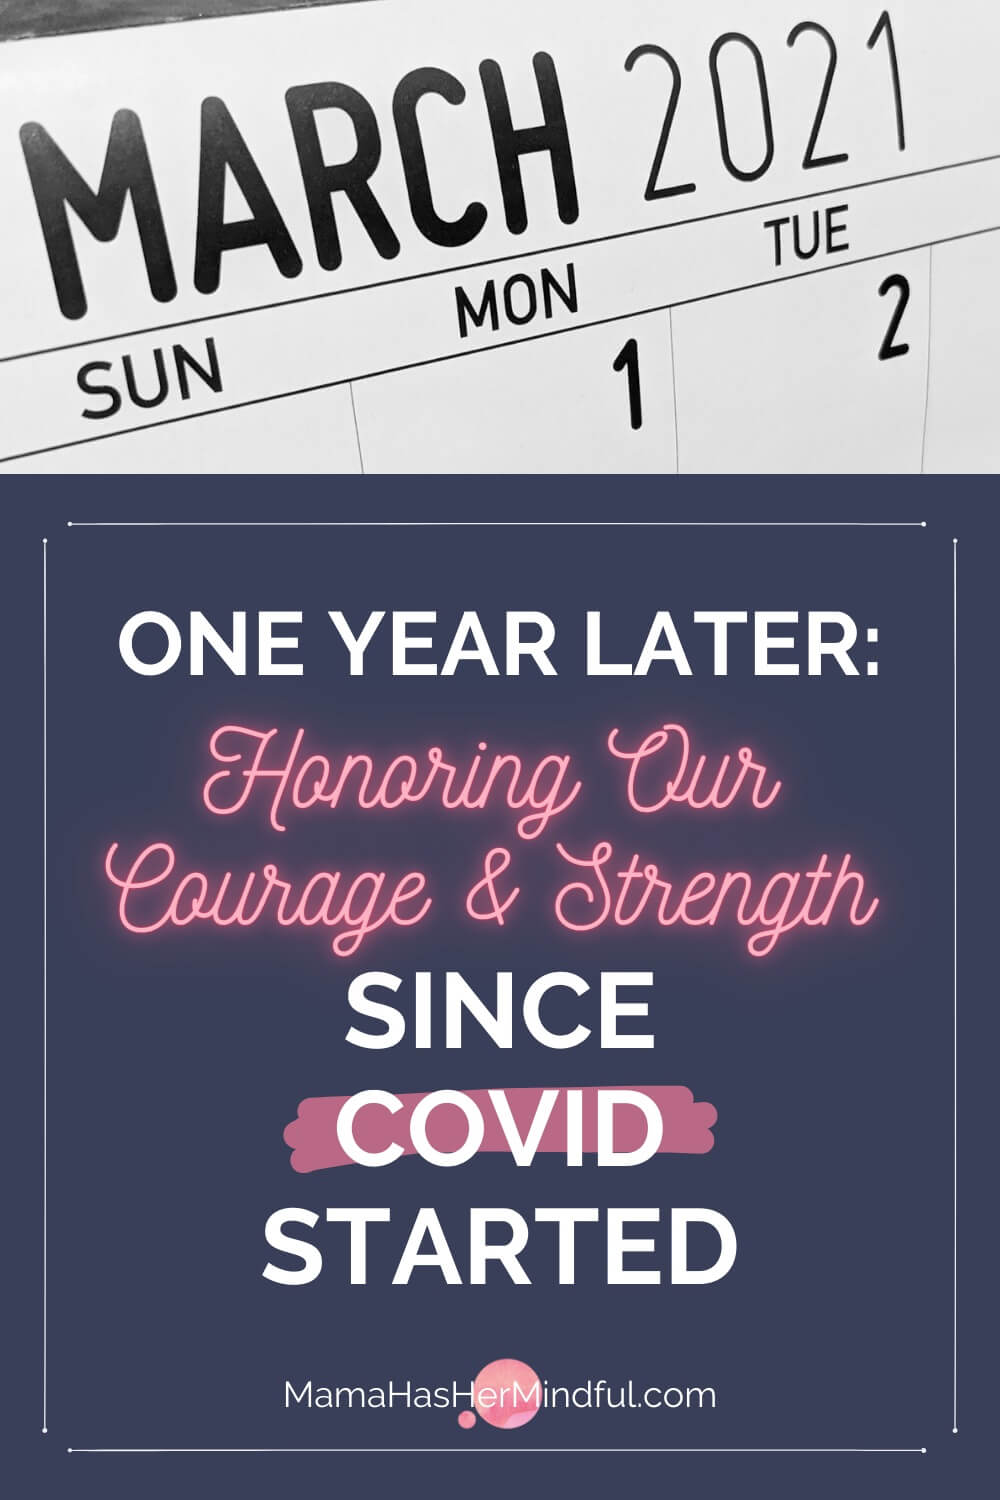 One Year Later: Honoring How We’ve Changed Since COVID Started